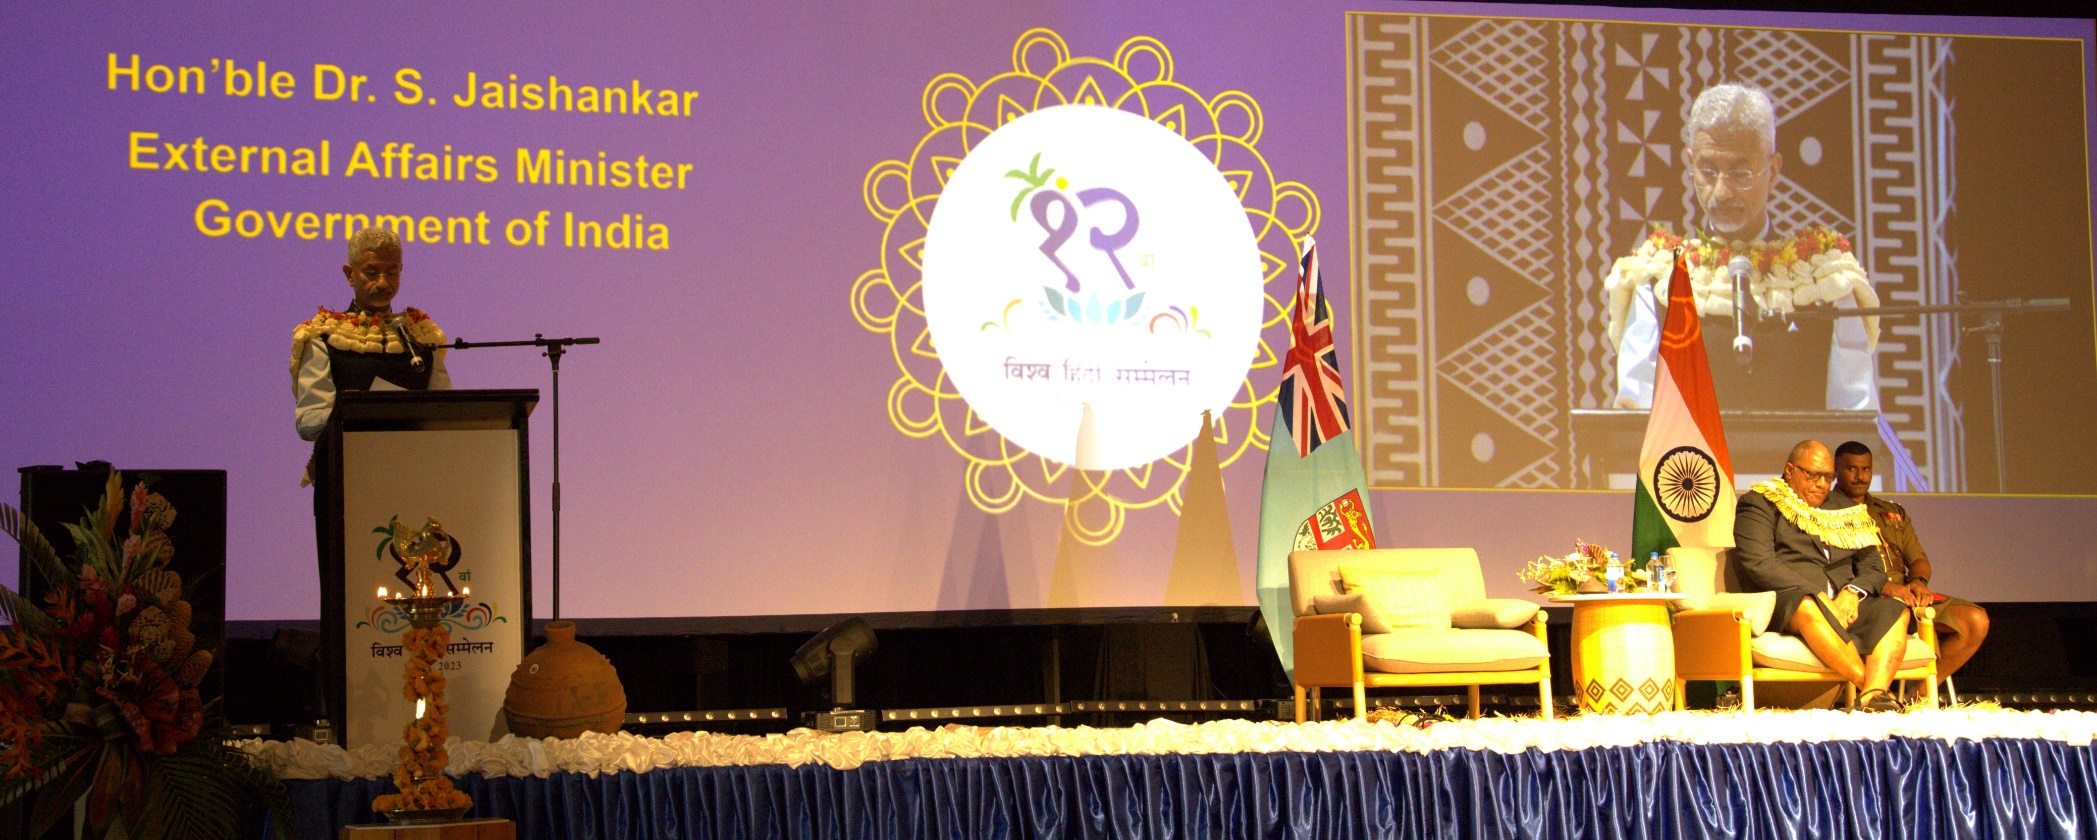 Hon. EAM Dr. S. Jaishankar during his address at the Opening Ceremony of the 12 th World Hindi Conference in Nadi on 15.02.2023